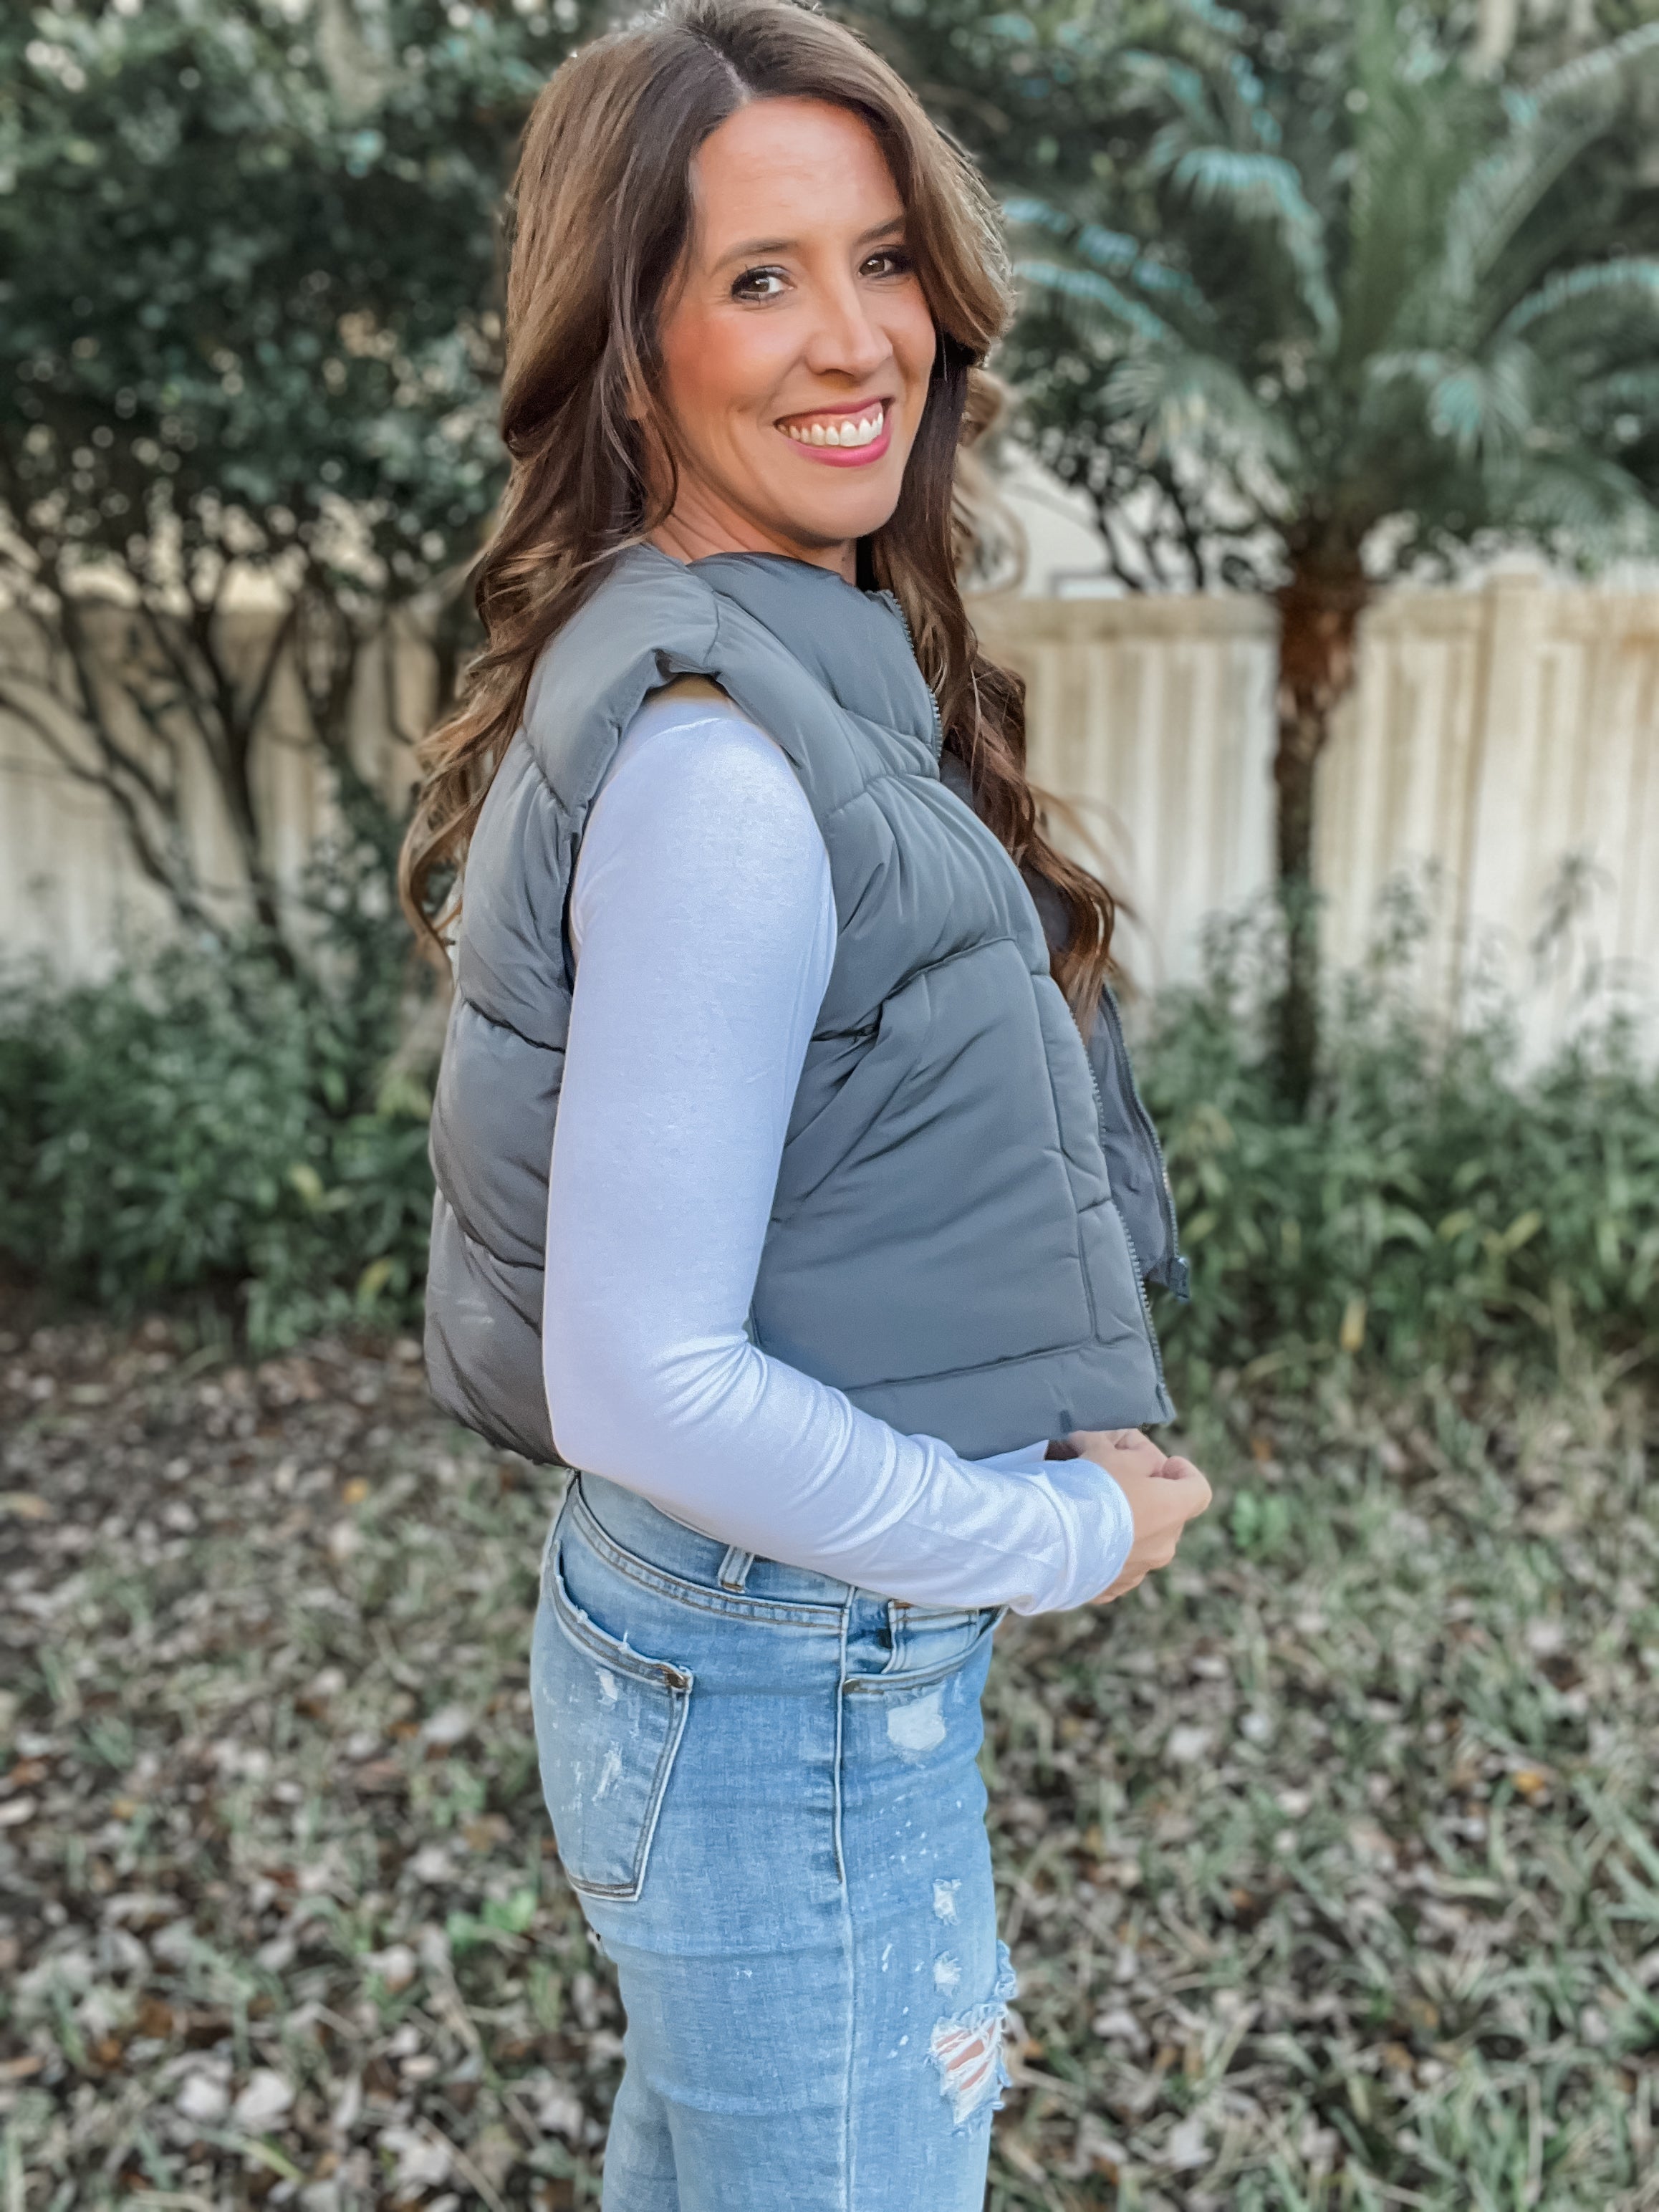 Pocketed Puffer Vest